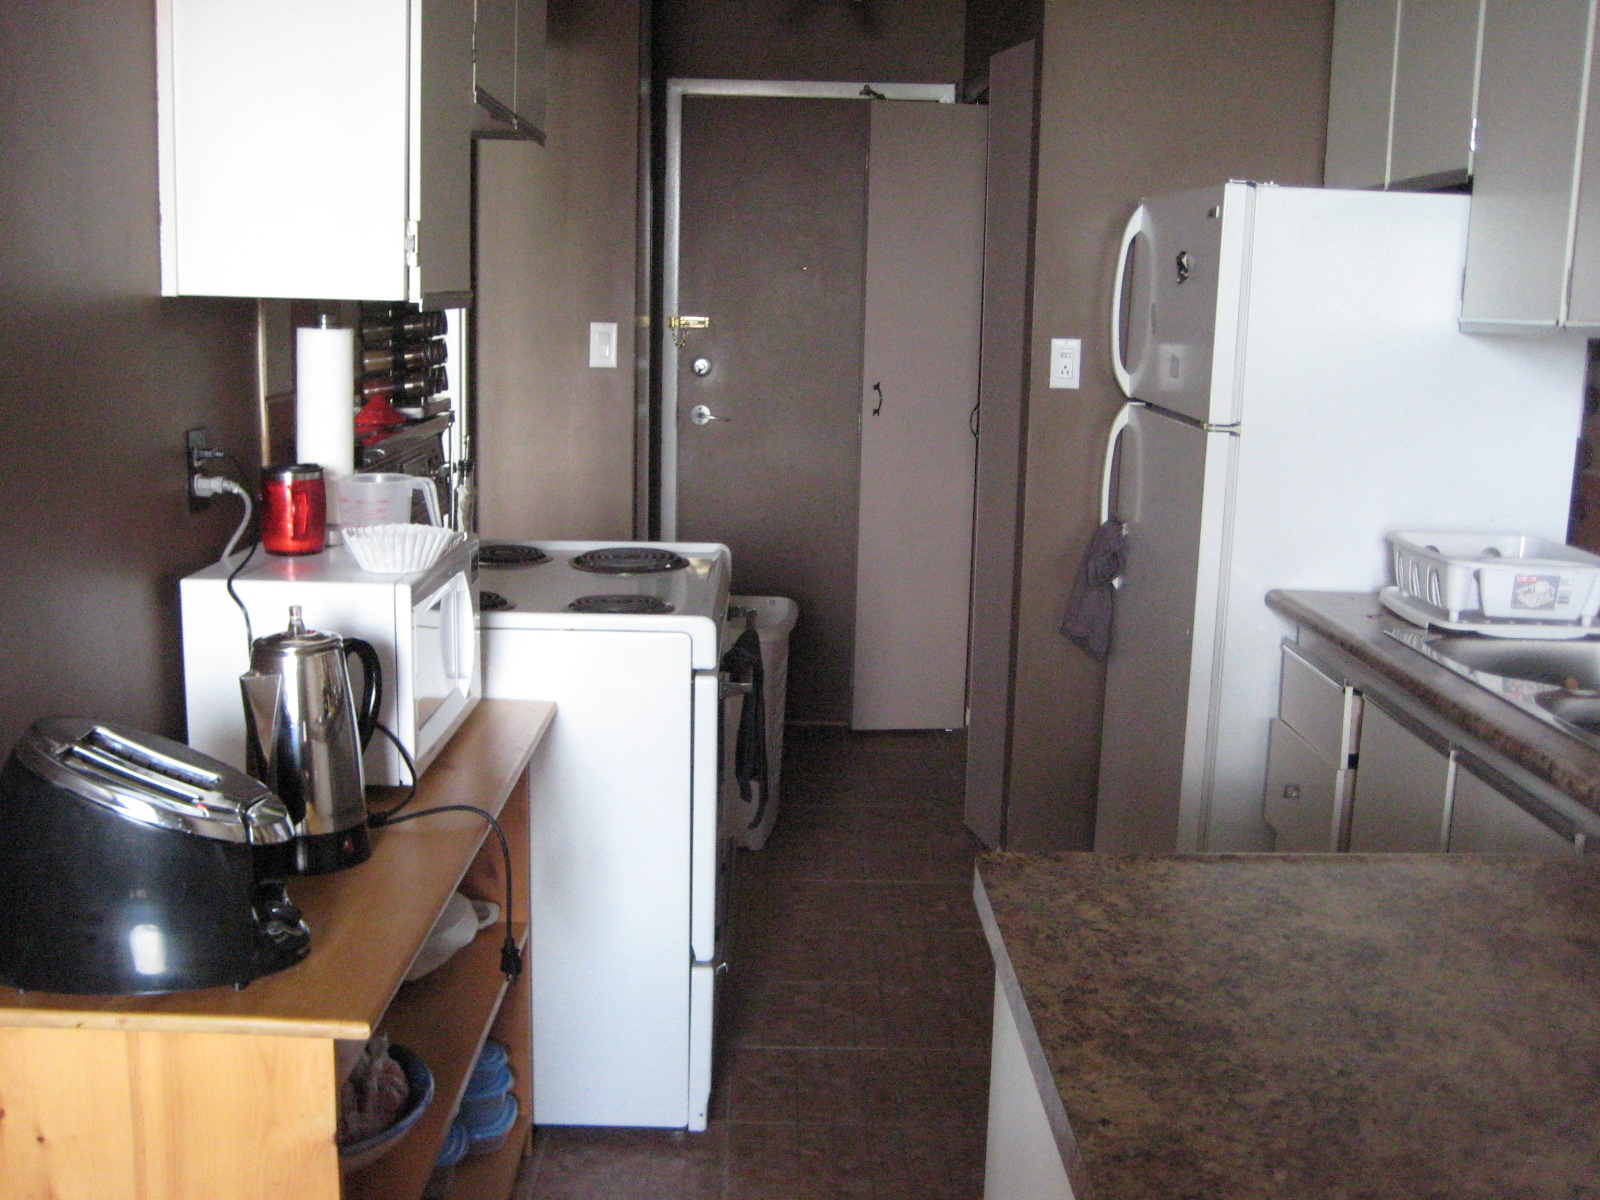 a kitchen is shown with a refrigerator and microwave